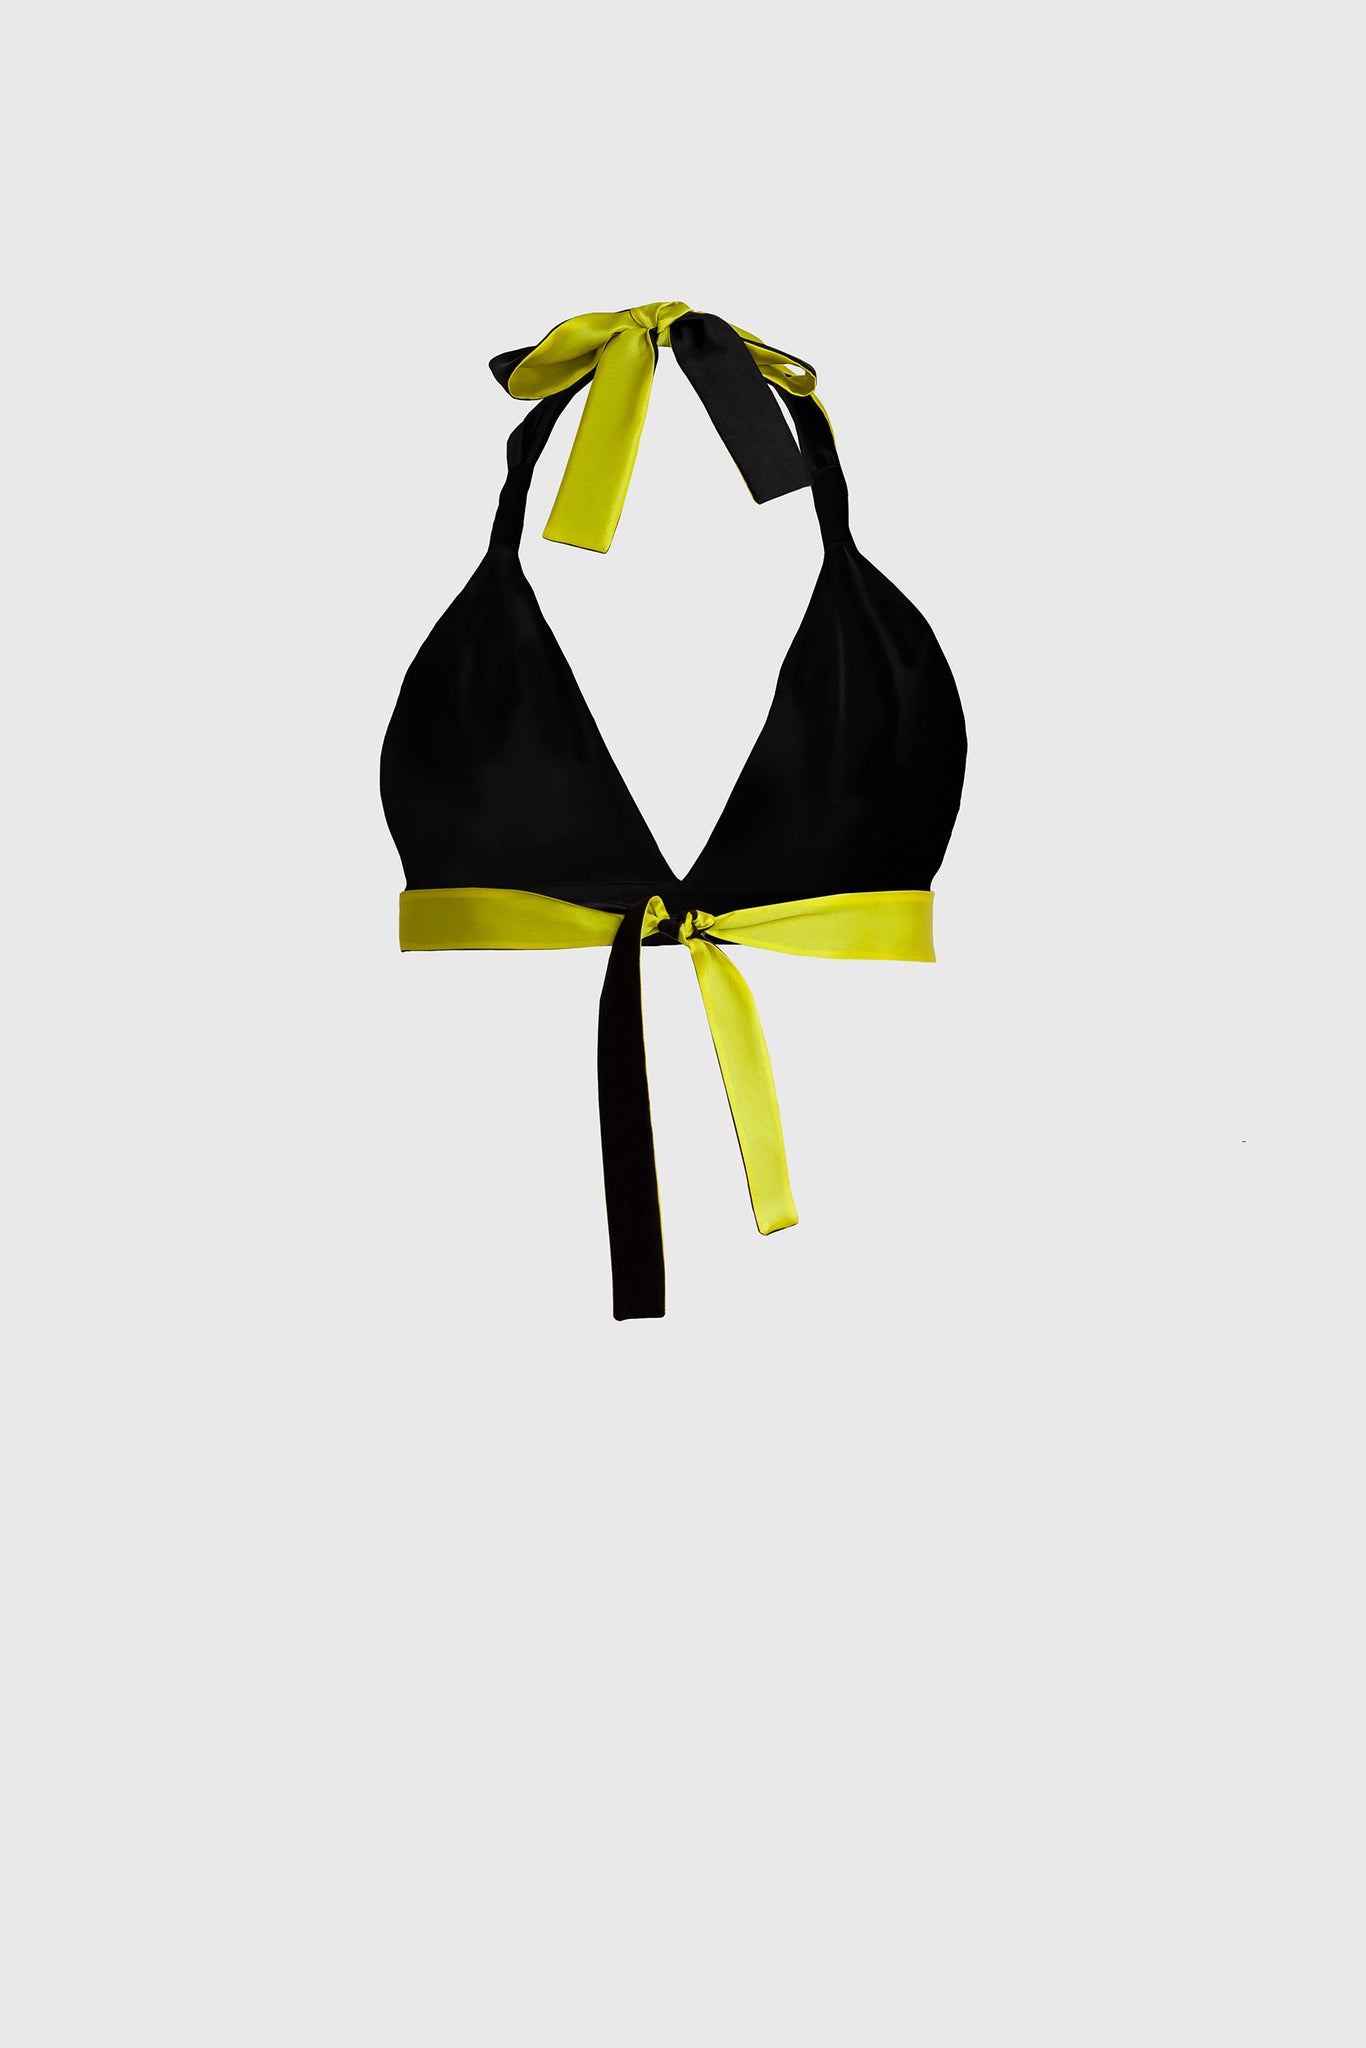 Women's luxury bra top, Italian Crepe Satin Silk, lined with black silk, contrasting main lemon yellow face, tie ribbons closure, feminine, playful and cool, style with baggy pants or mini skirt in the club or at the resort